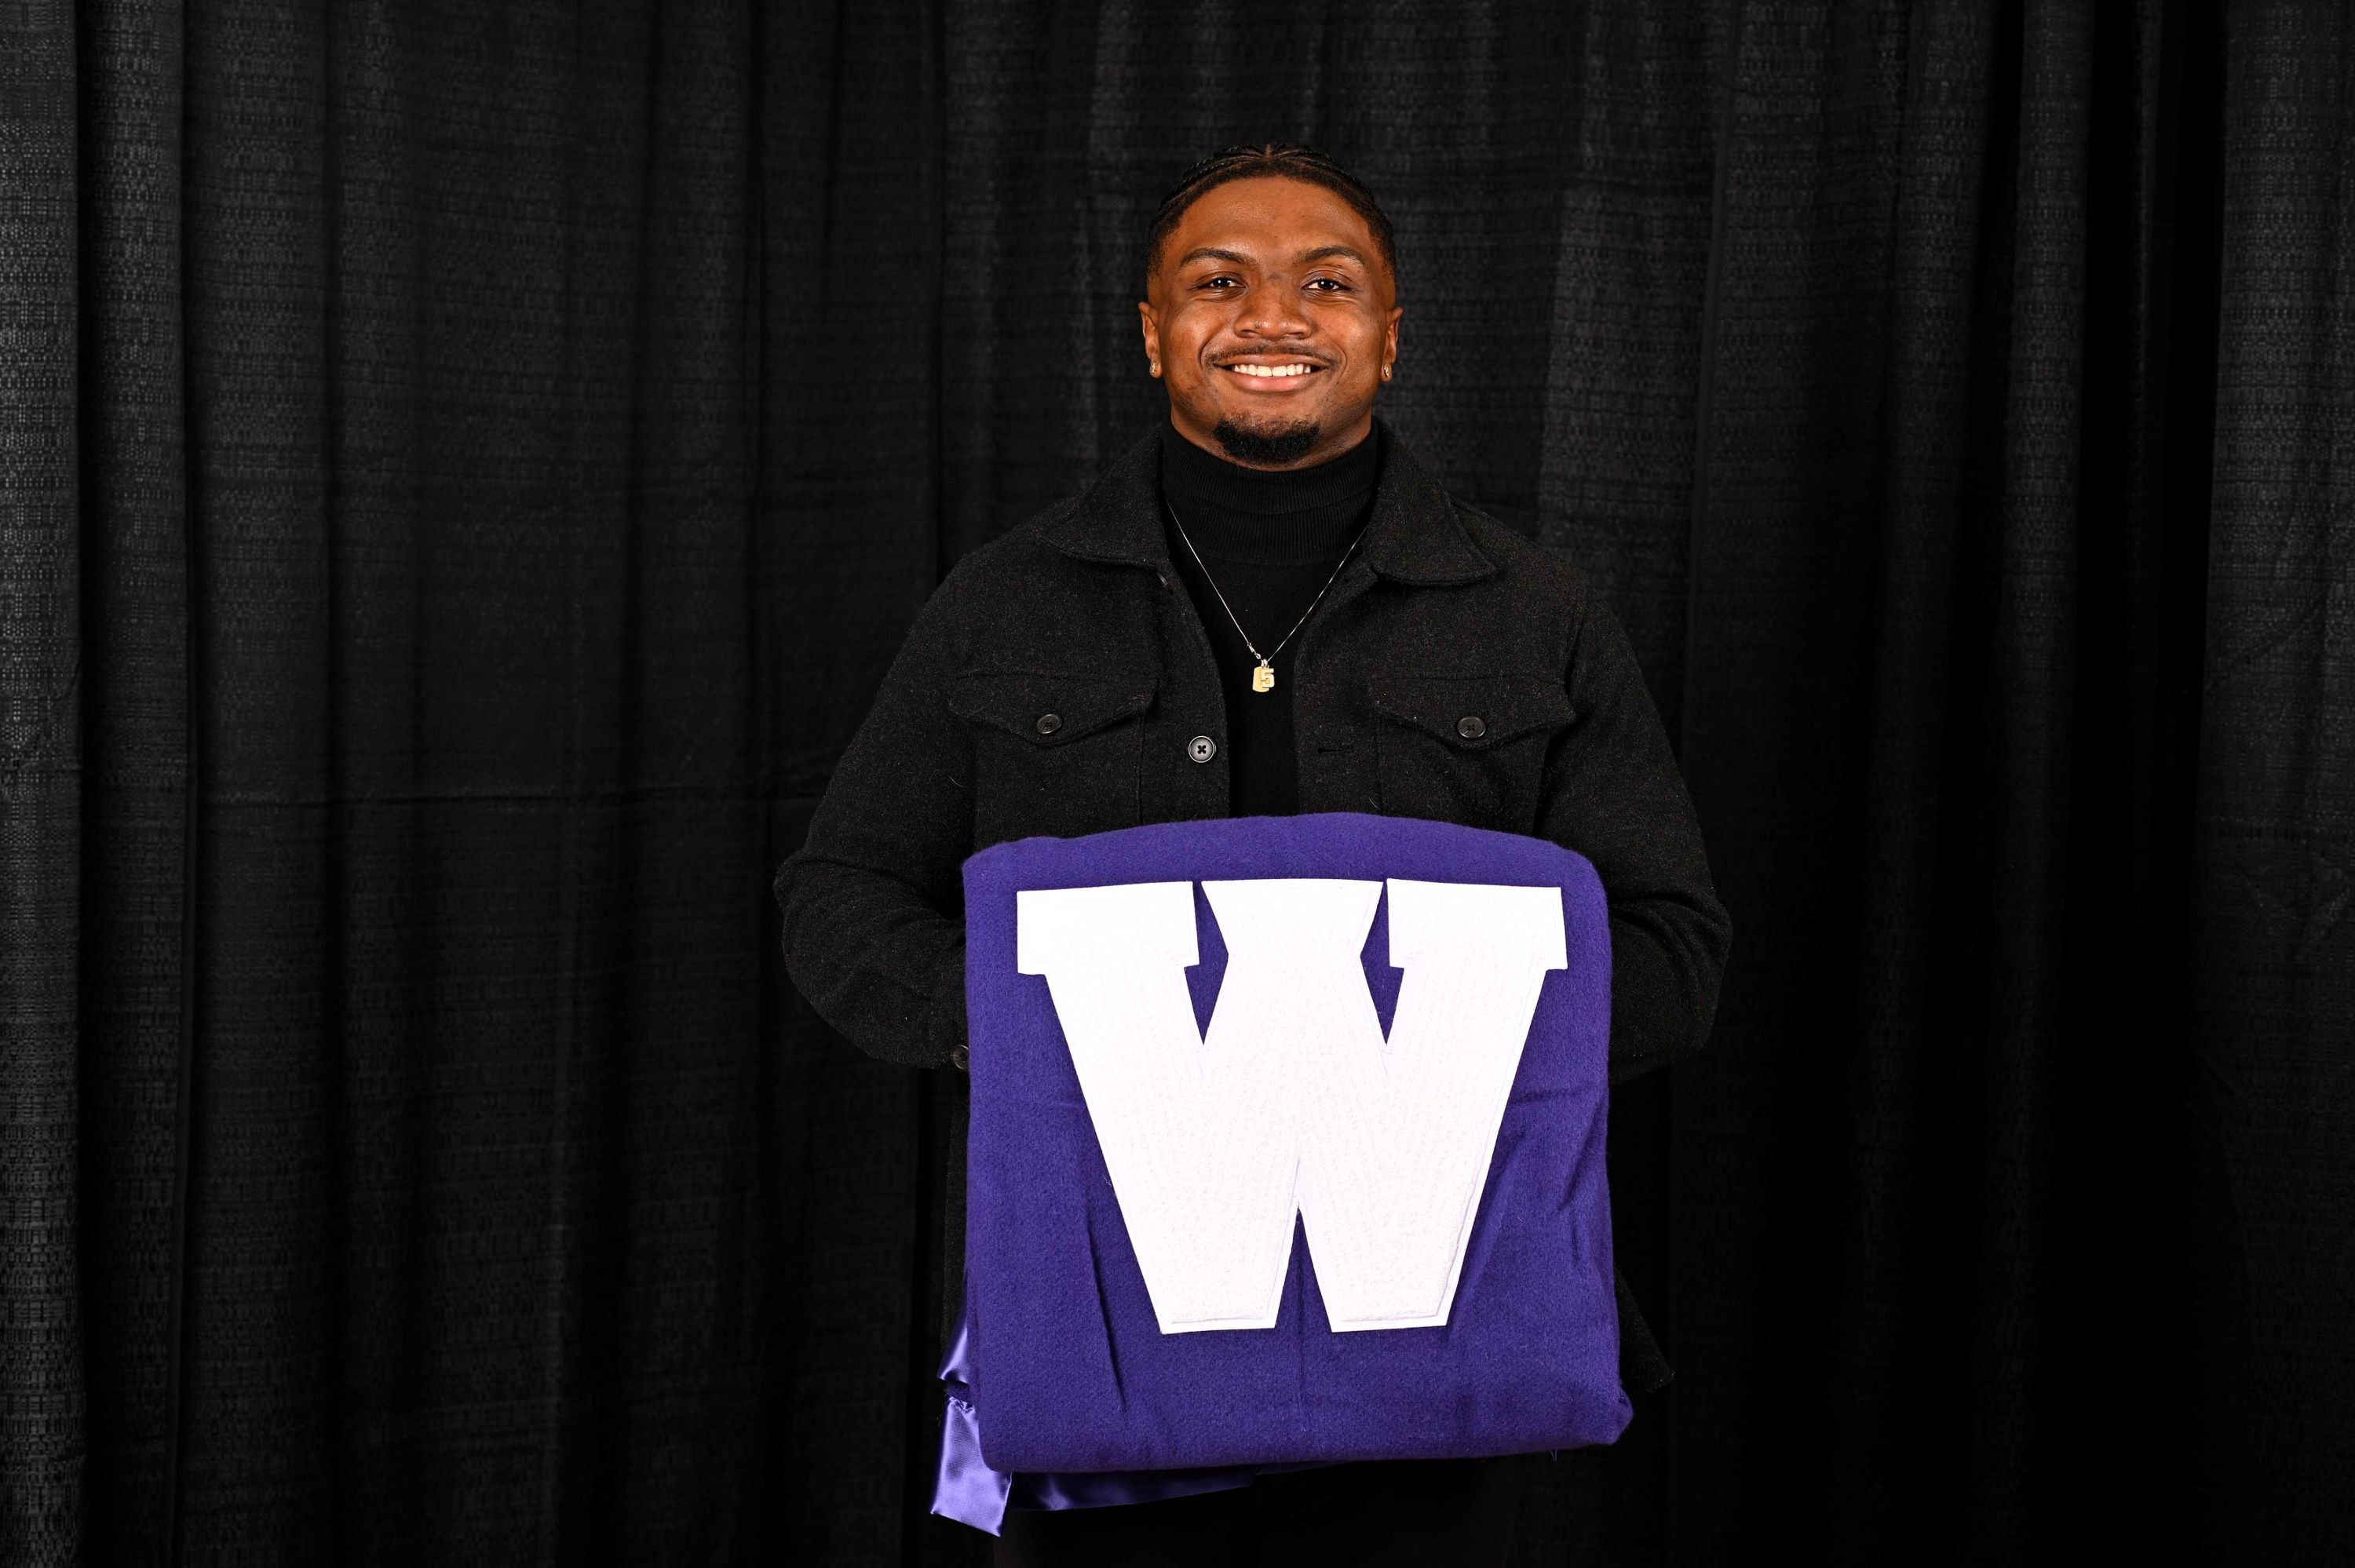 Keon Edwards with his purple blanket